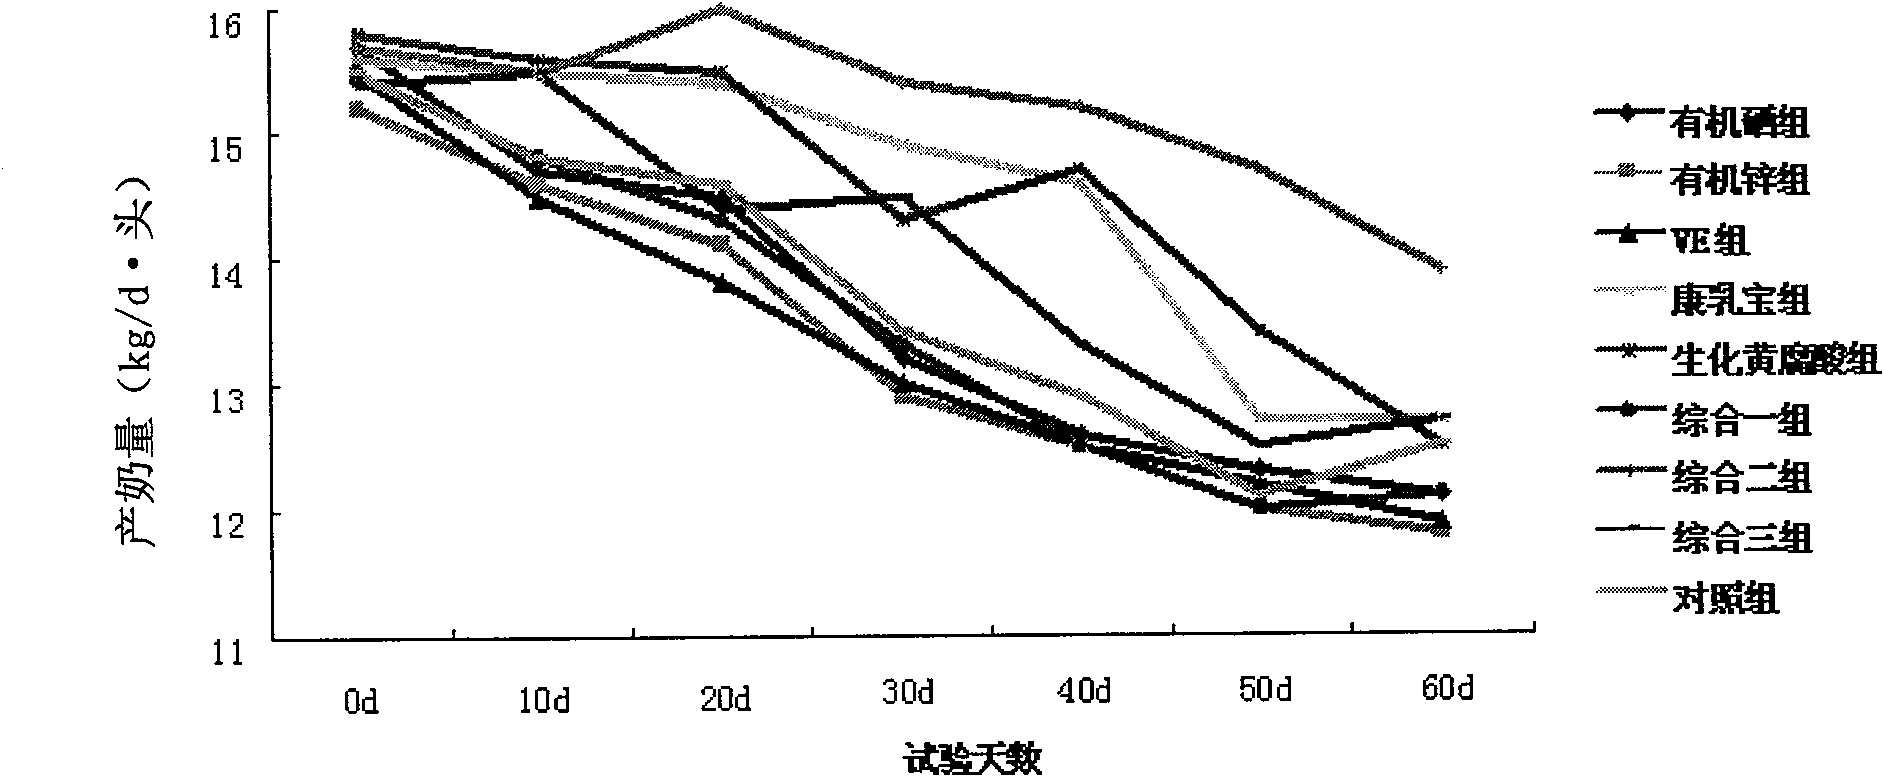 Functional dairy cattle feed additive capable of preventing subclinical mastitis of dairy cattle